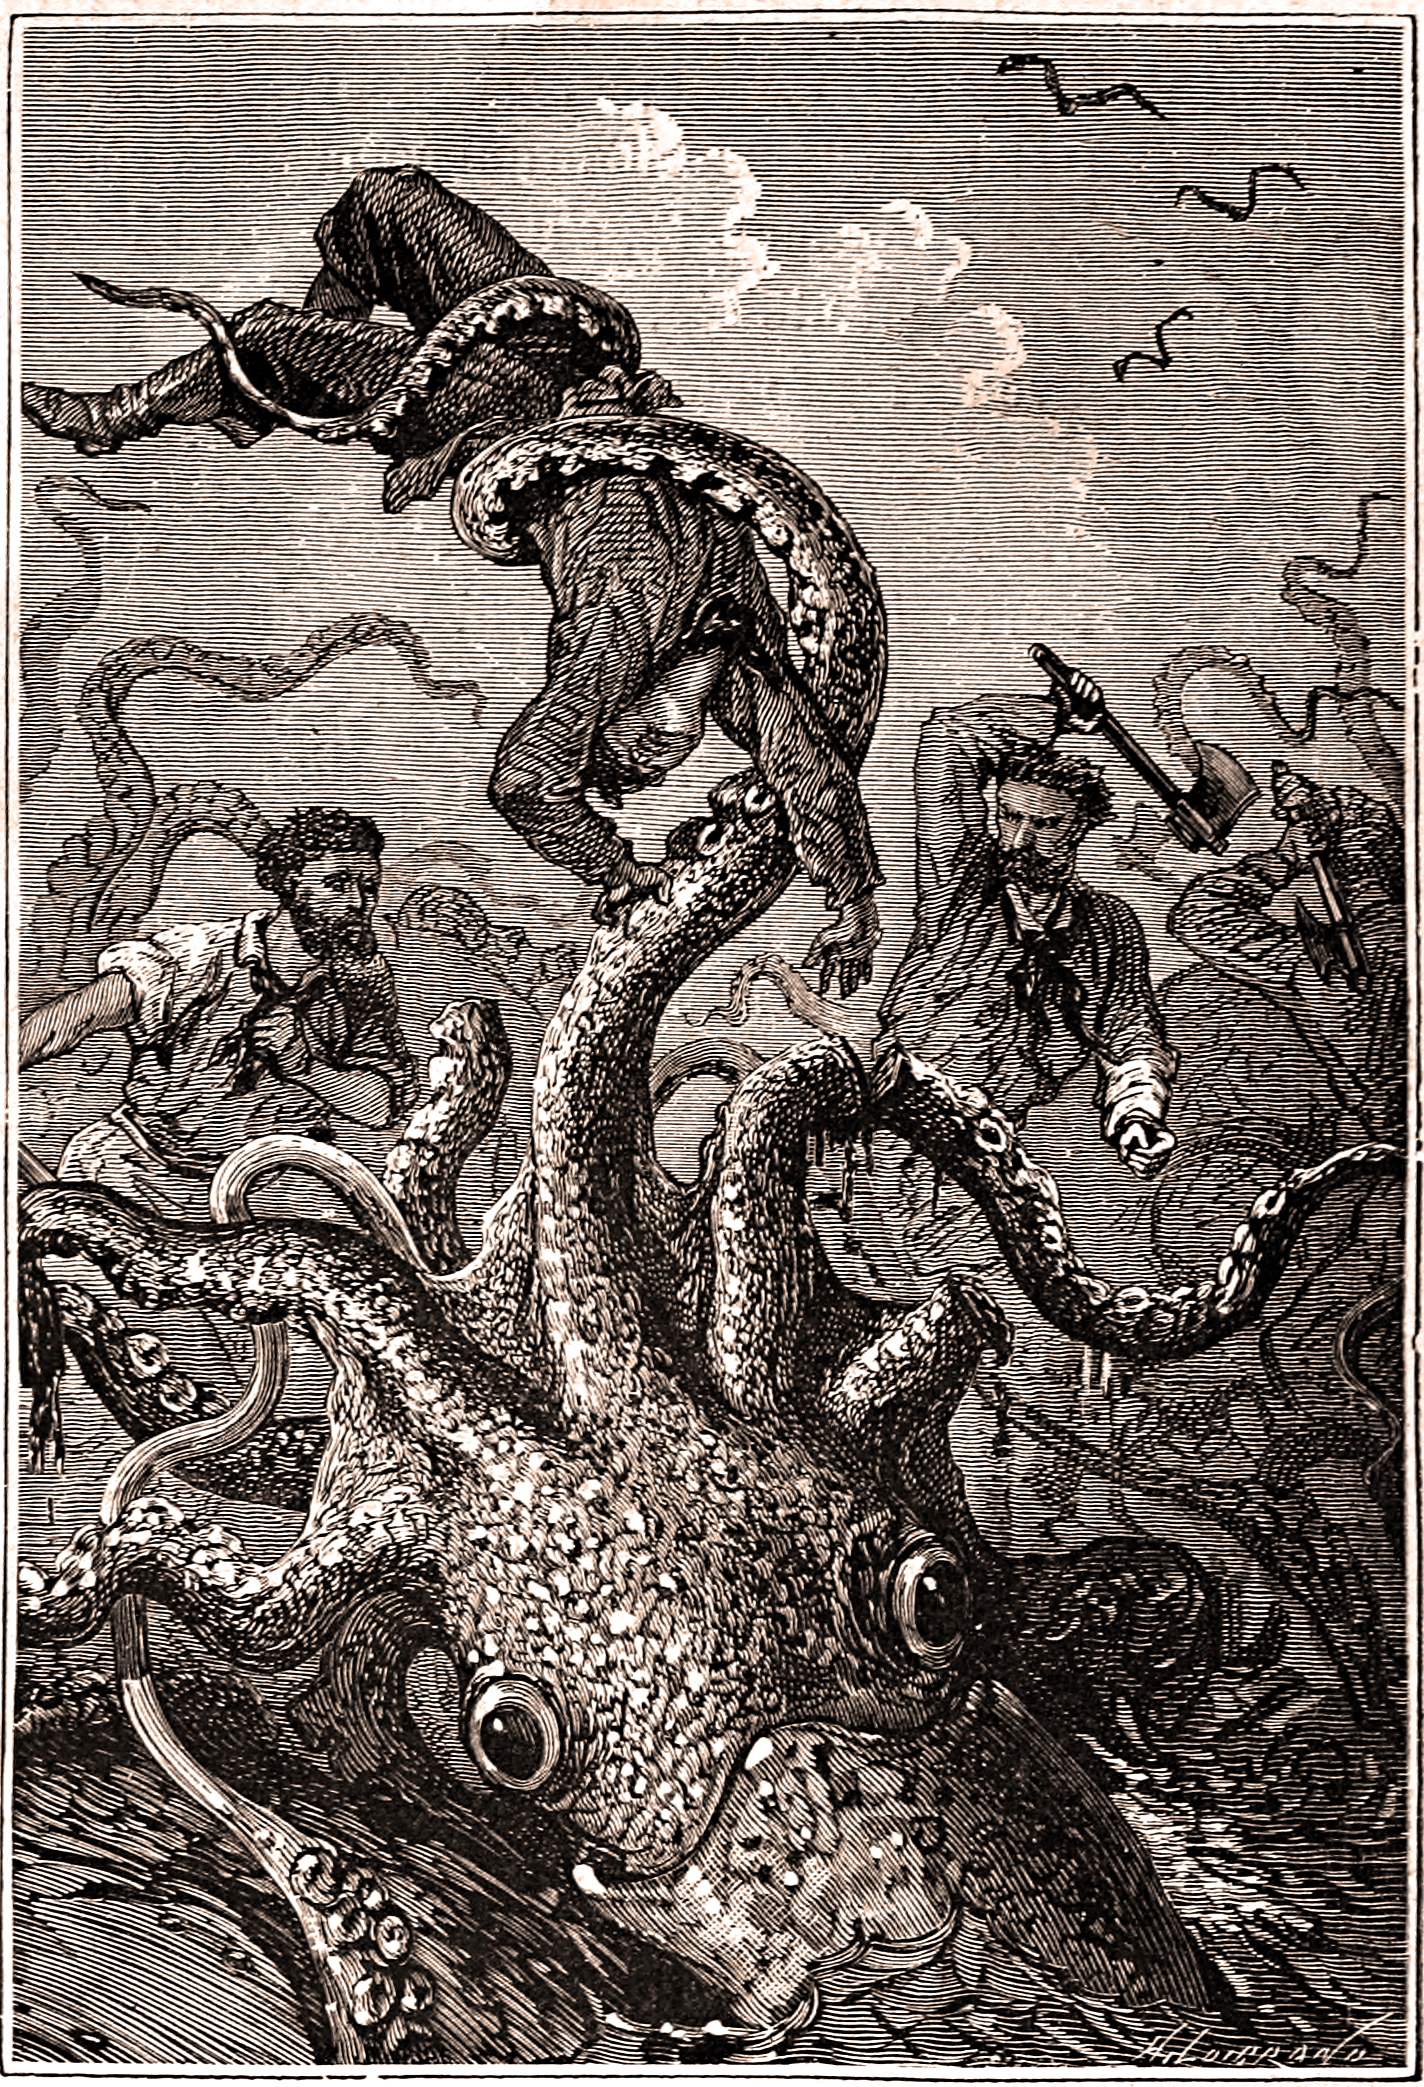 A giant squid battling a crew of seafarers with one of its tentacles tightly wrapped around a man struggling upside-down